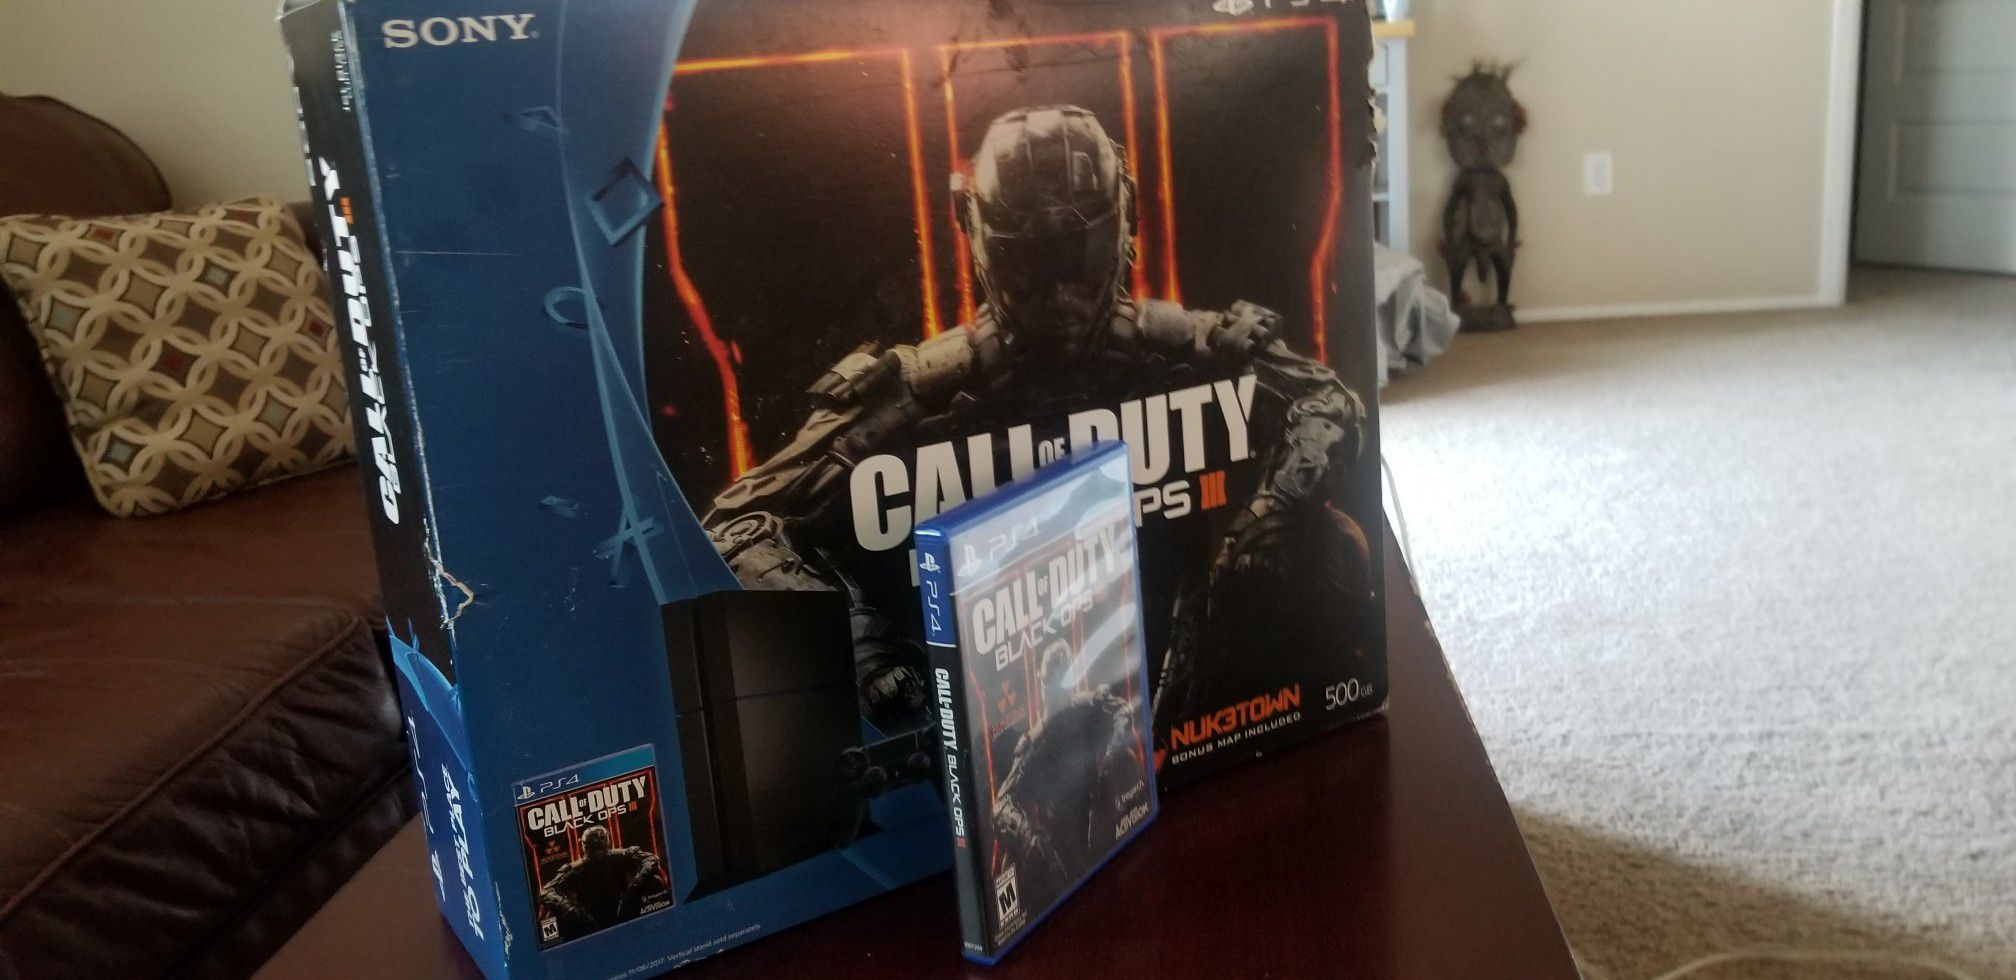 Ps4 500gb, power cord and hdmi, COD blk ops, no controller